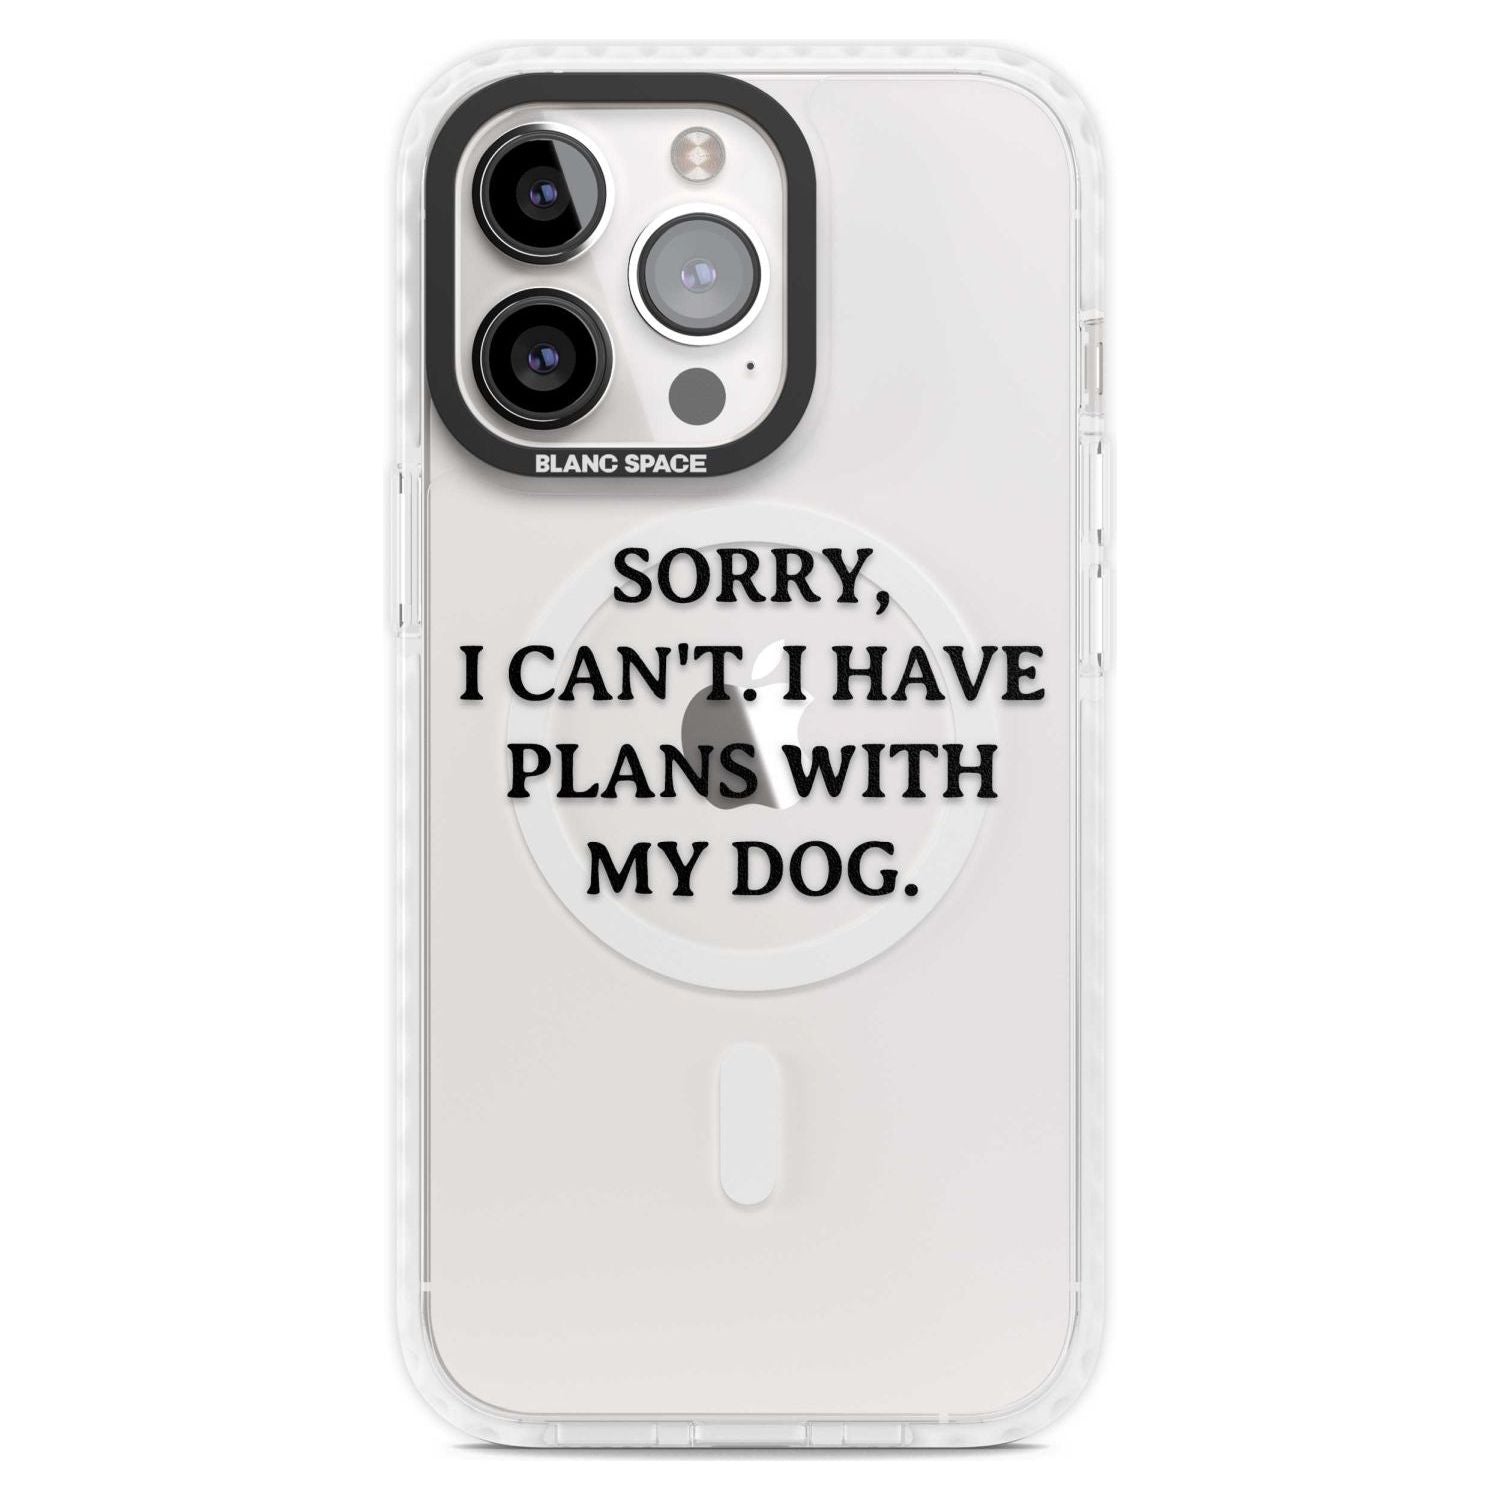 I Have Plans With My Dog Phone Case iPhone 15 Pro Max / Magsafe Impact Case,iPhone 15 Pro / Magsafe Impact Case Blanc Space